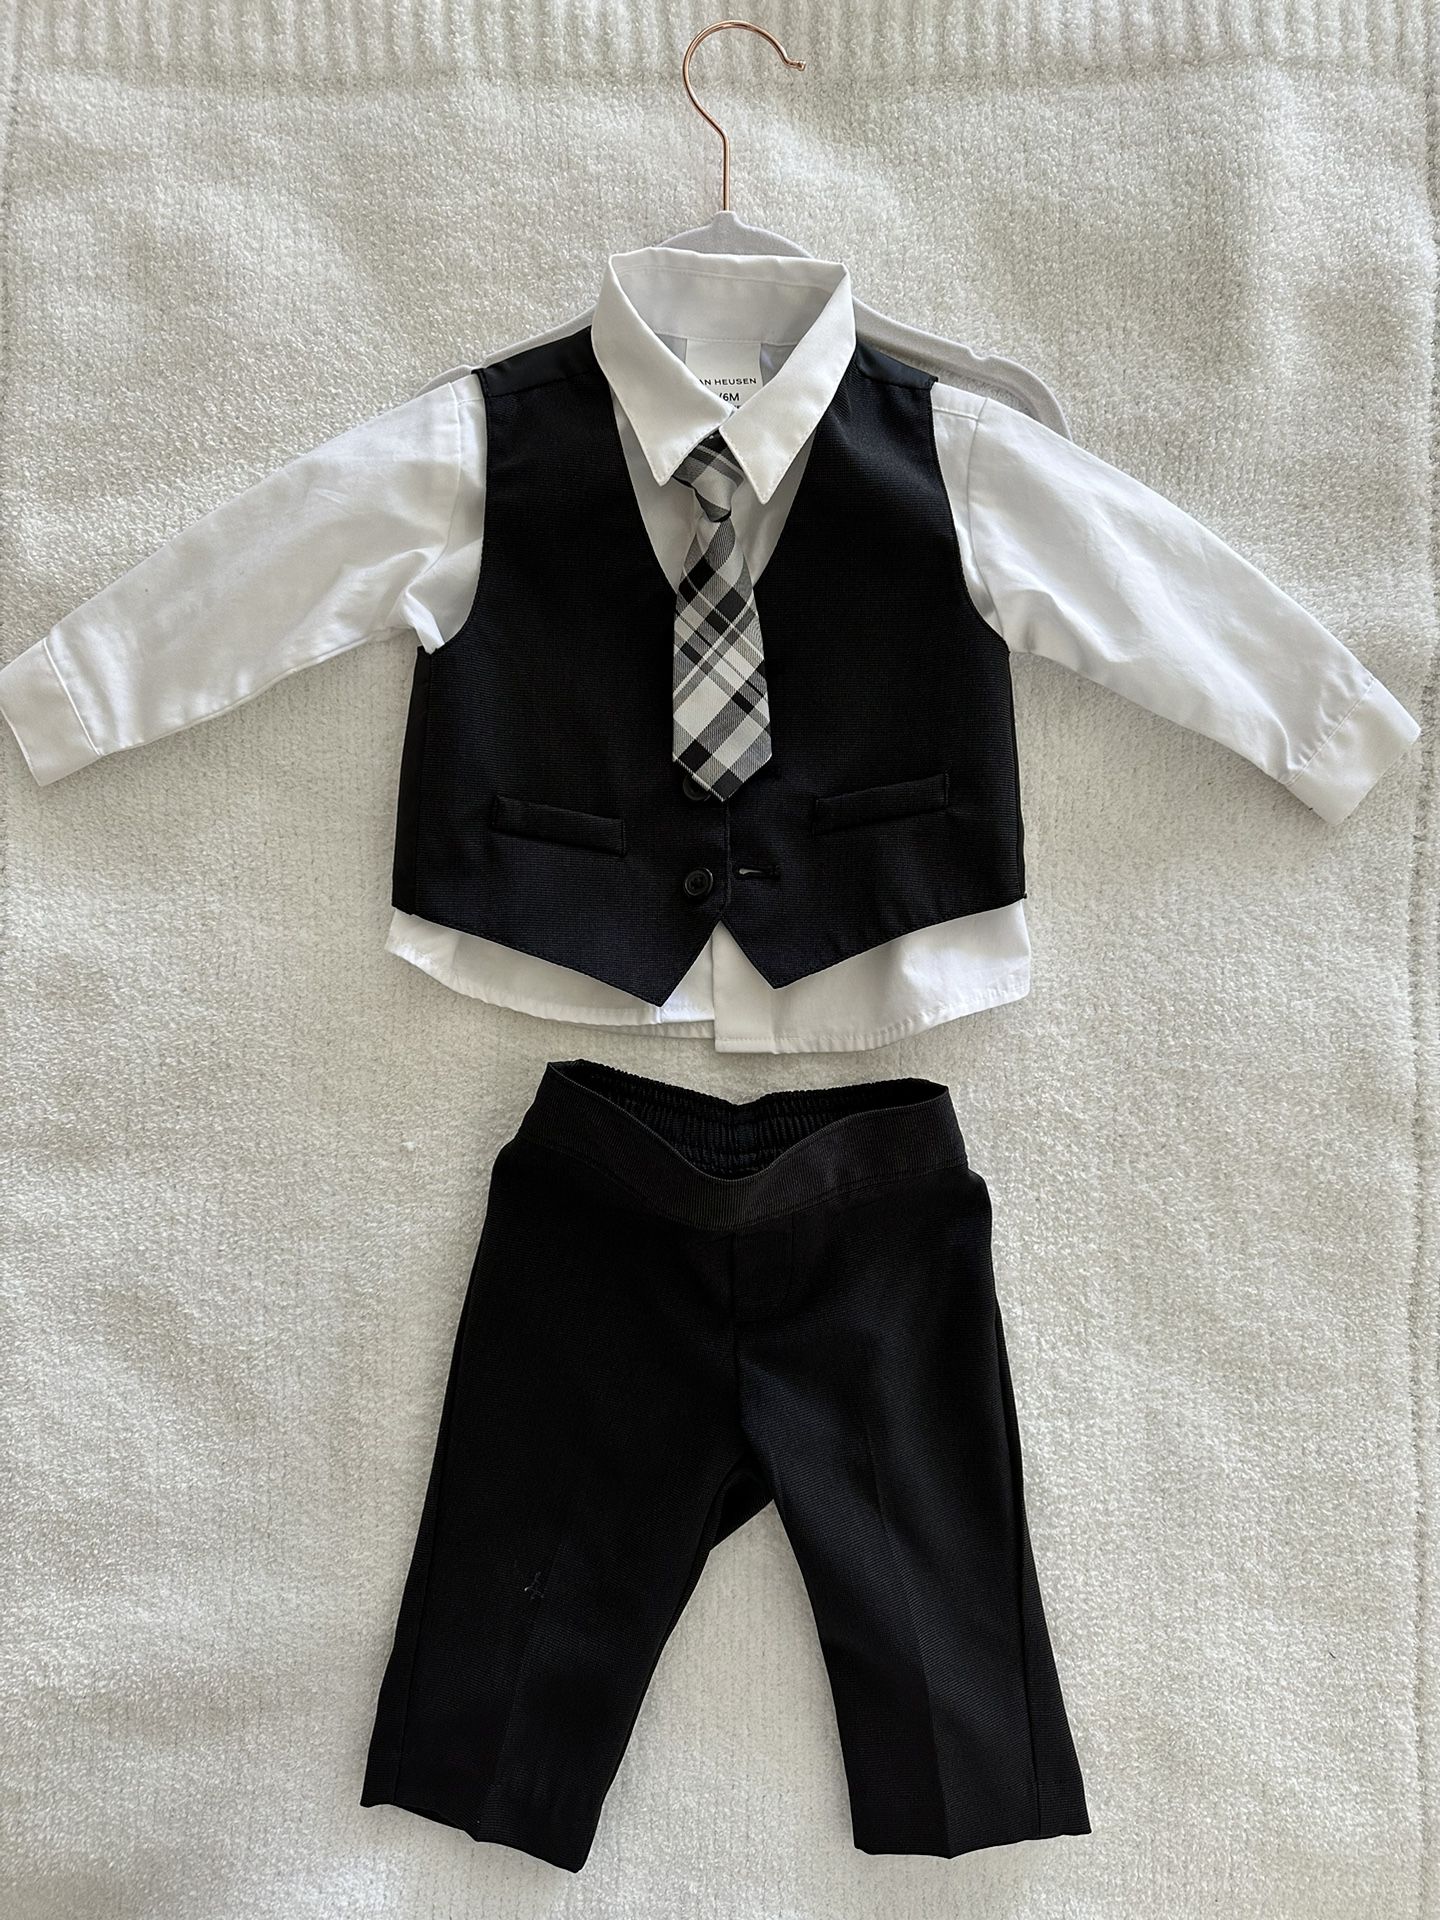  Baby Tuxedo Set Like-New (3-6 Months) - Worn Once